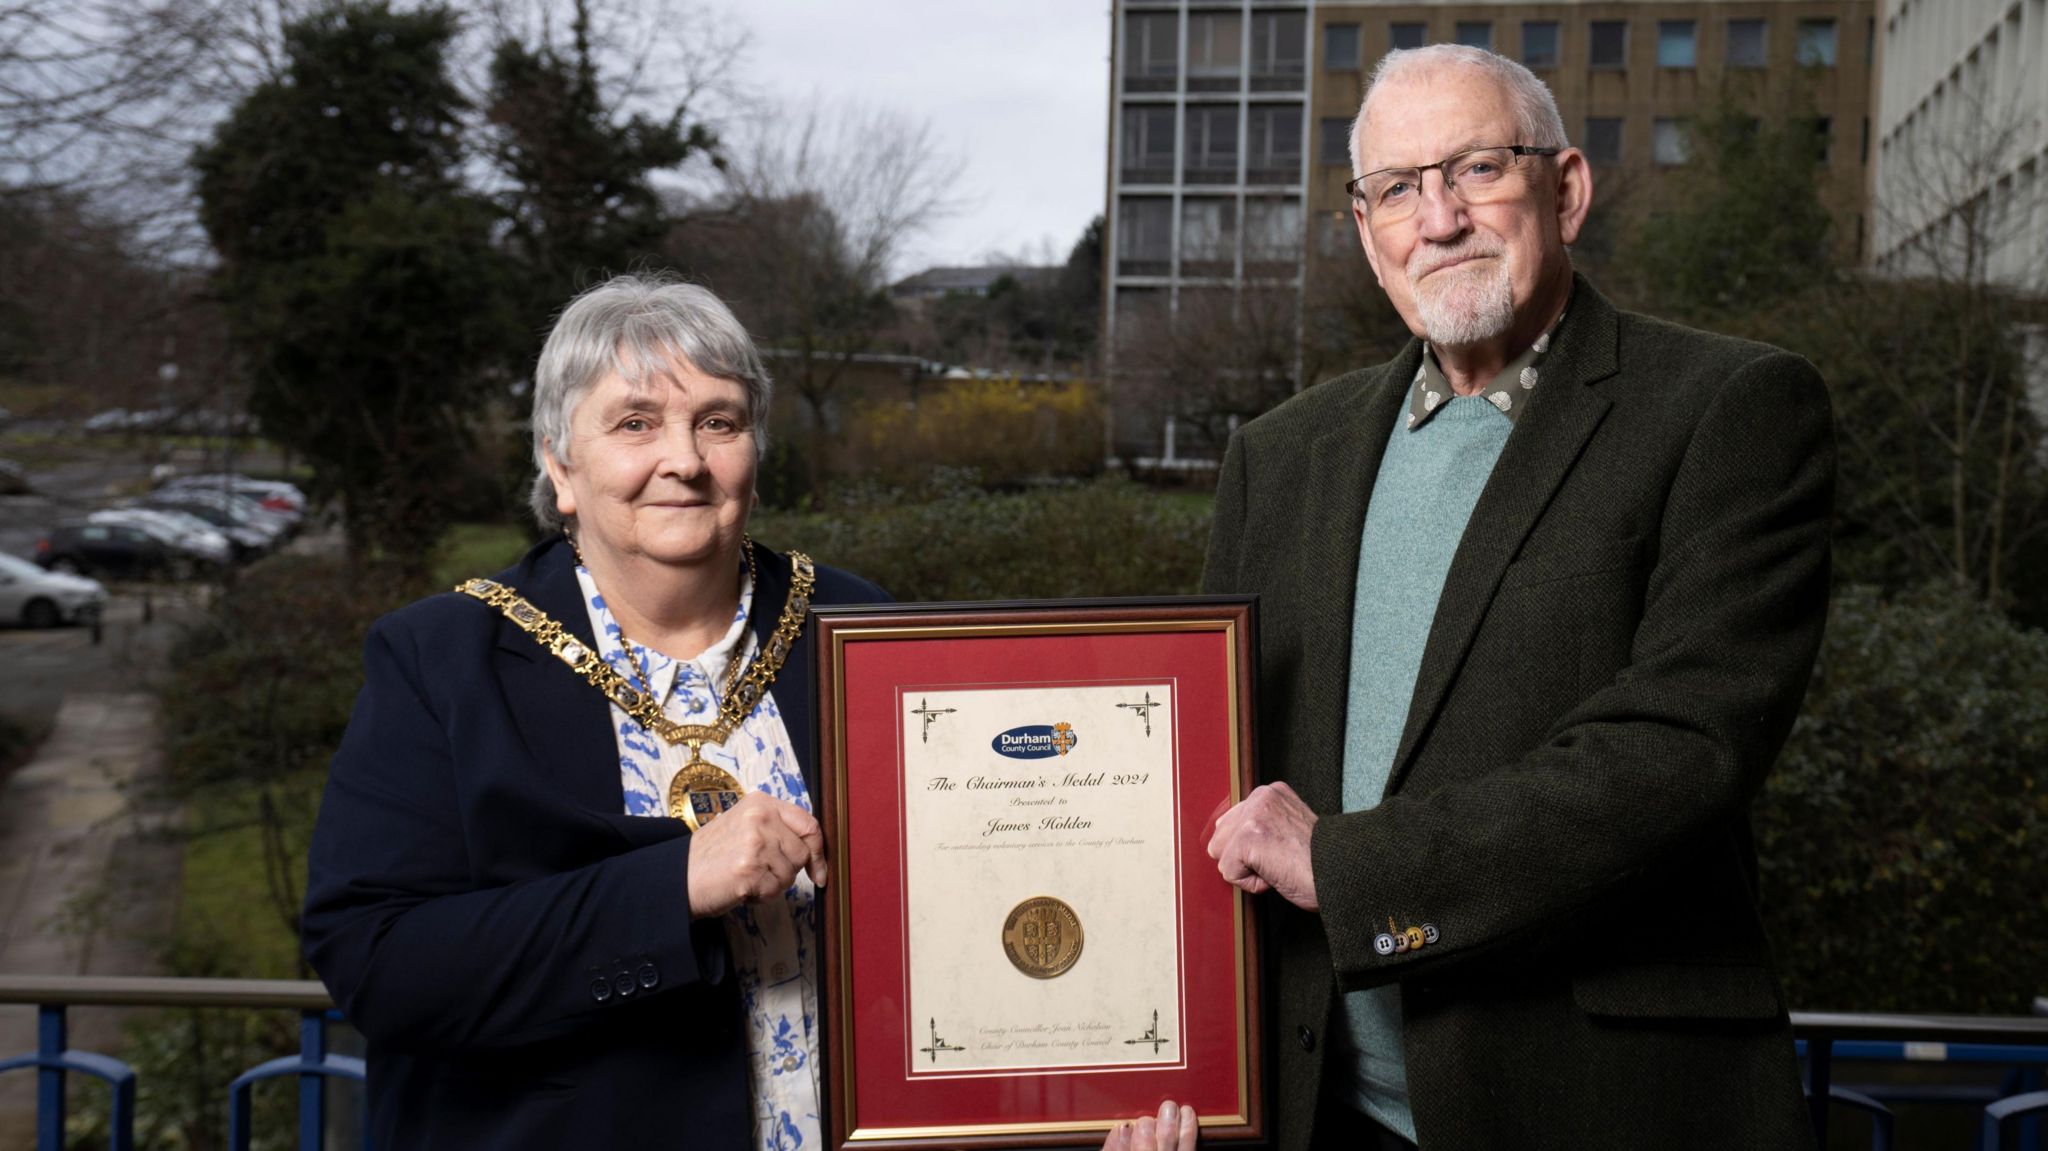 The Chairman of Durham County Council and a volunteer holding the Chairman's Medal in a frame